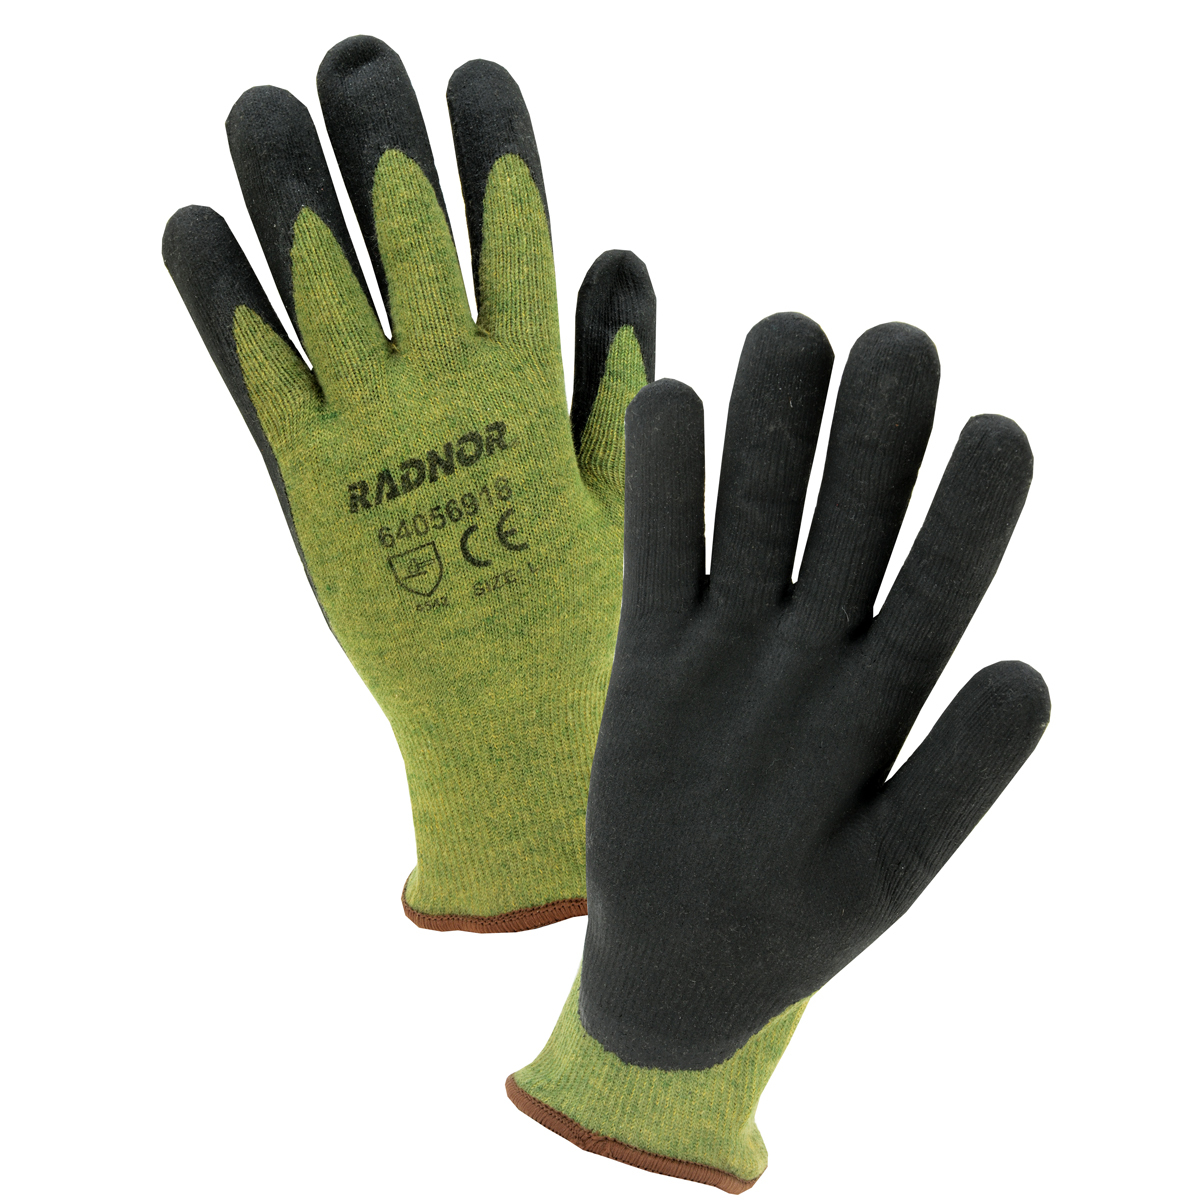 RADNOR® 2X 13 Gauge DuPont™ Kevlar®, Nitrile And Stainless Steel Cut Resistant Gloves With Foam Nitrile Coating